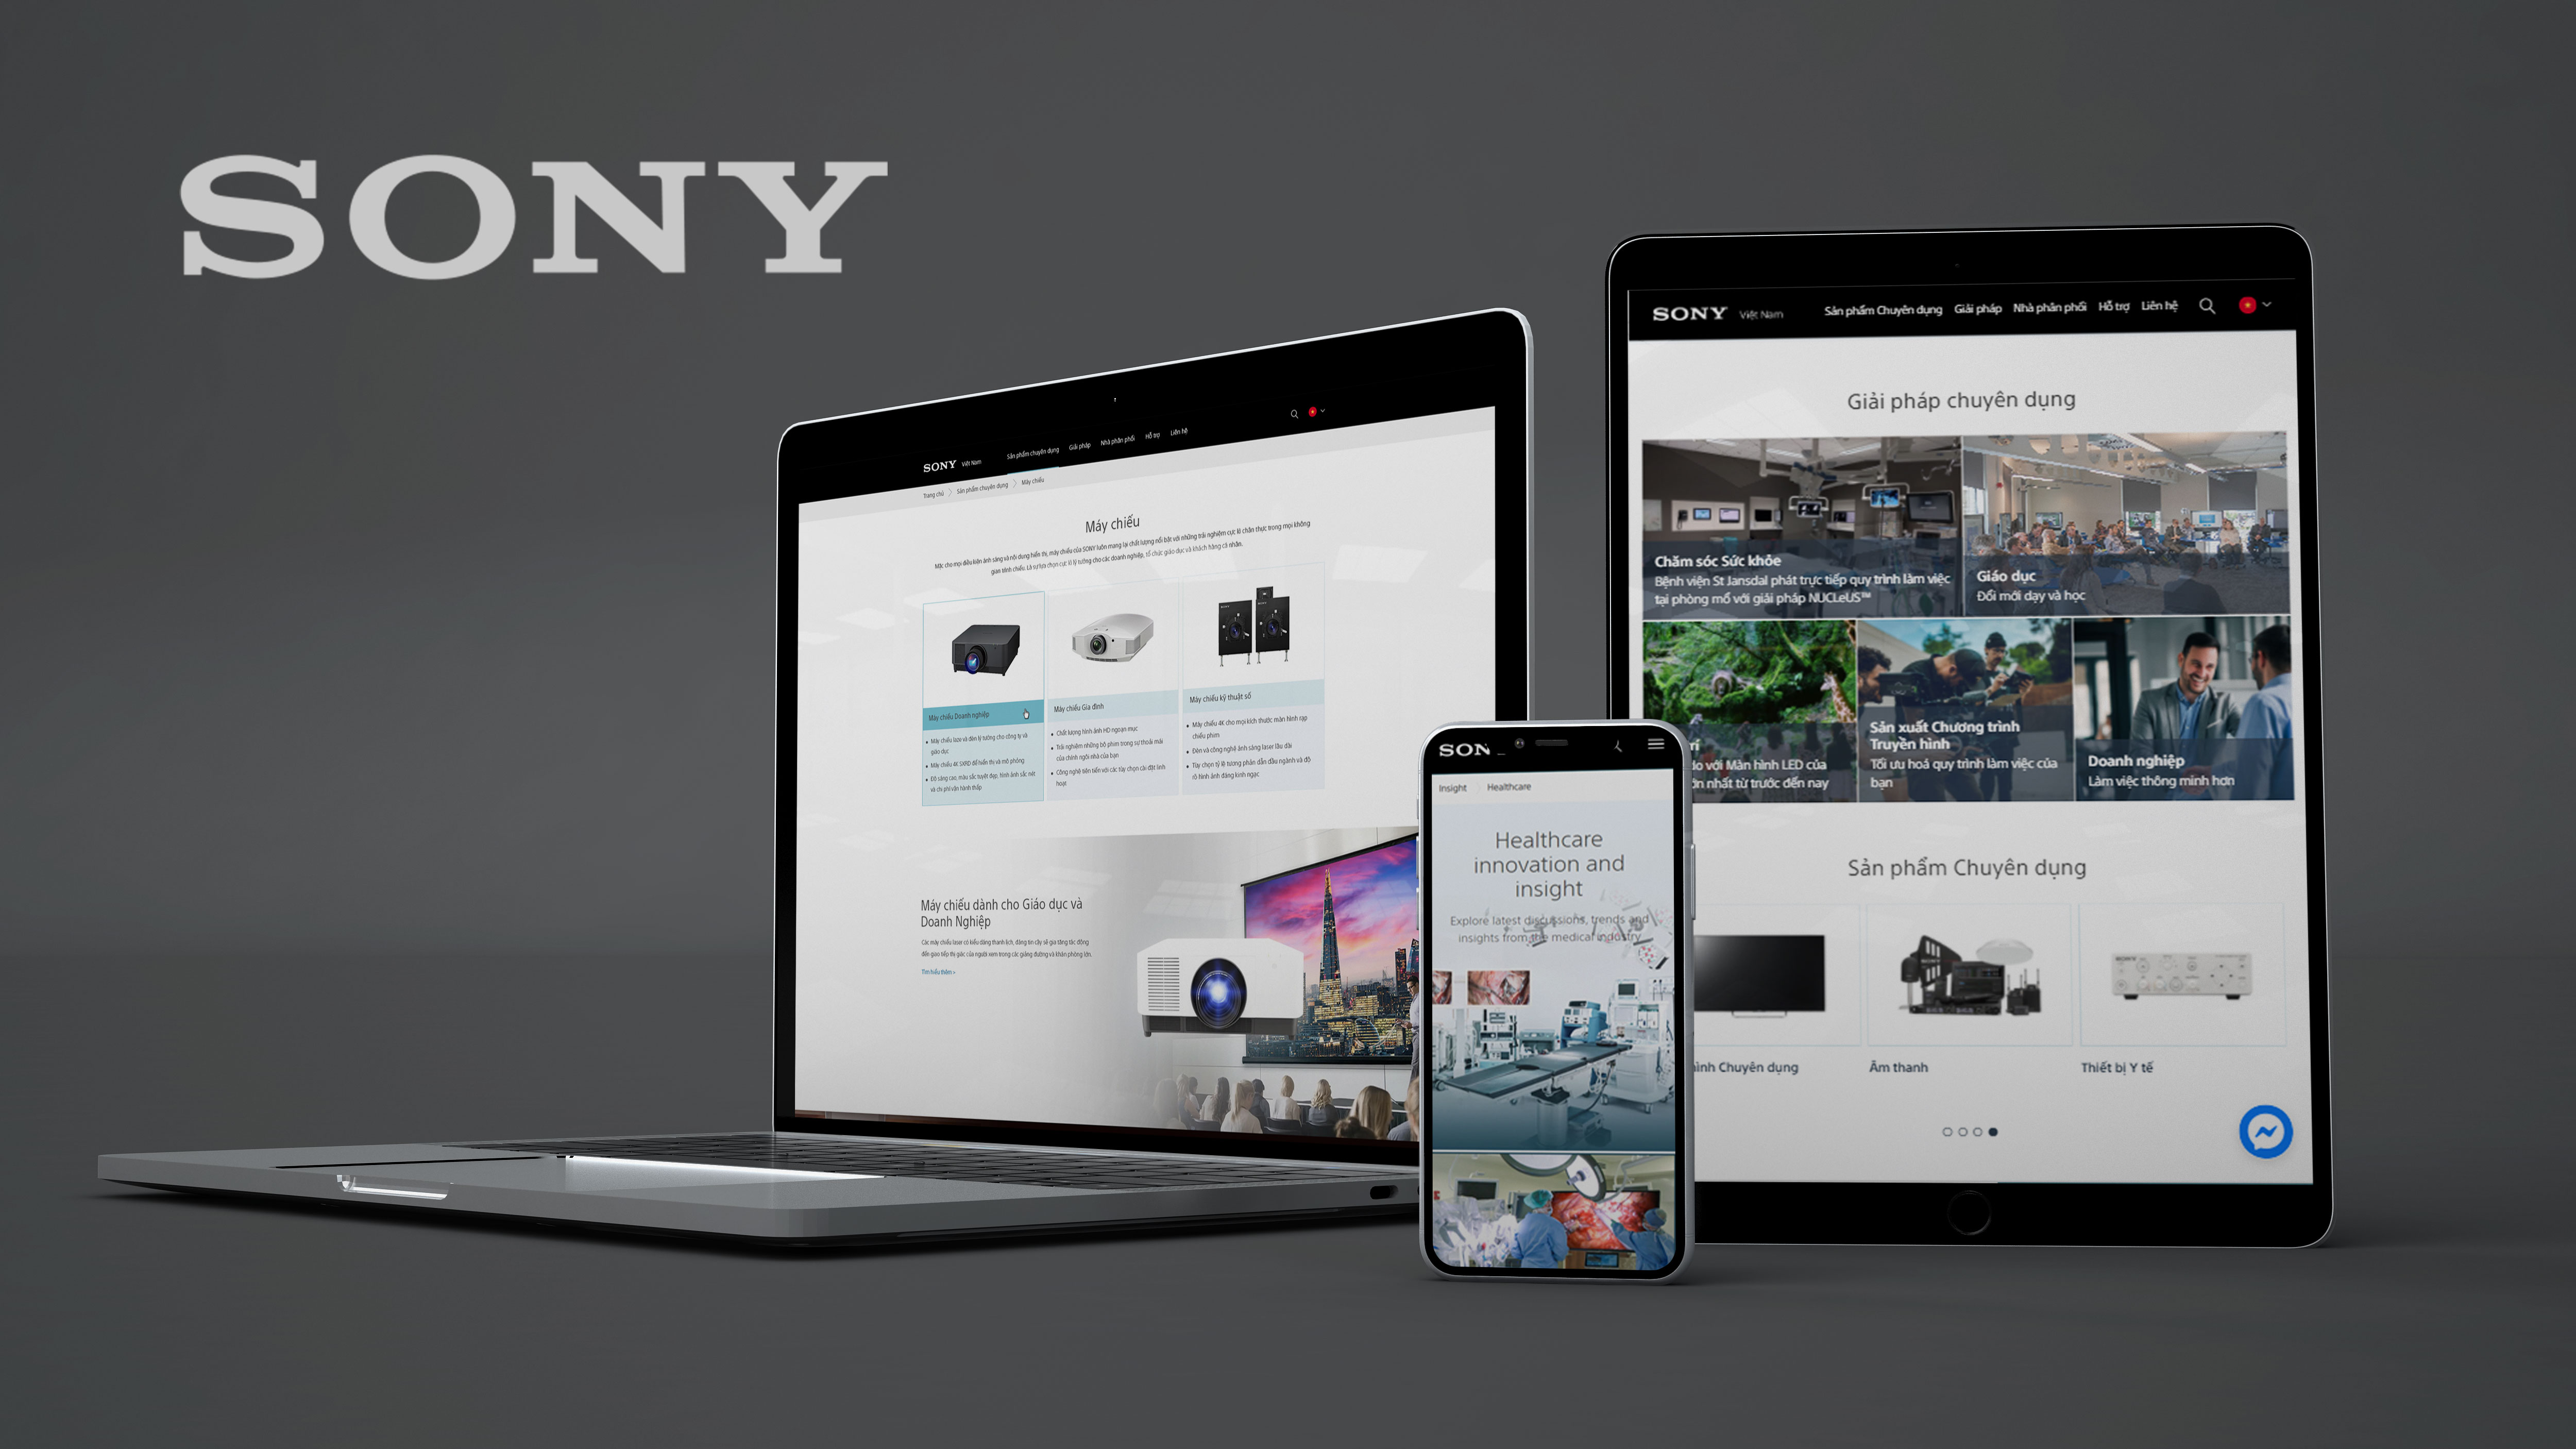 Sony ecomerce website design by Canh Cam image 4